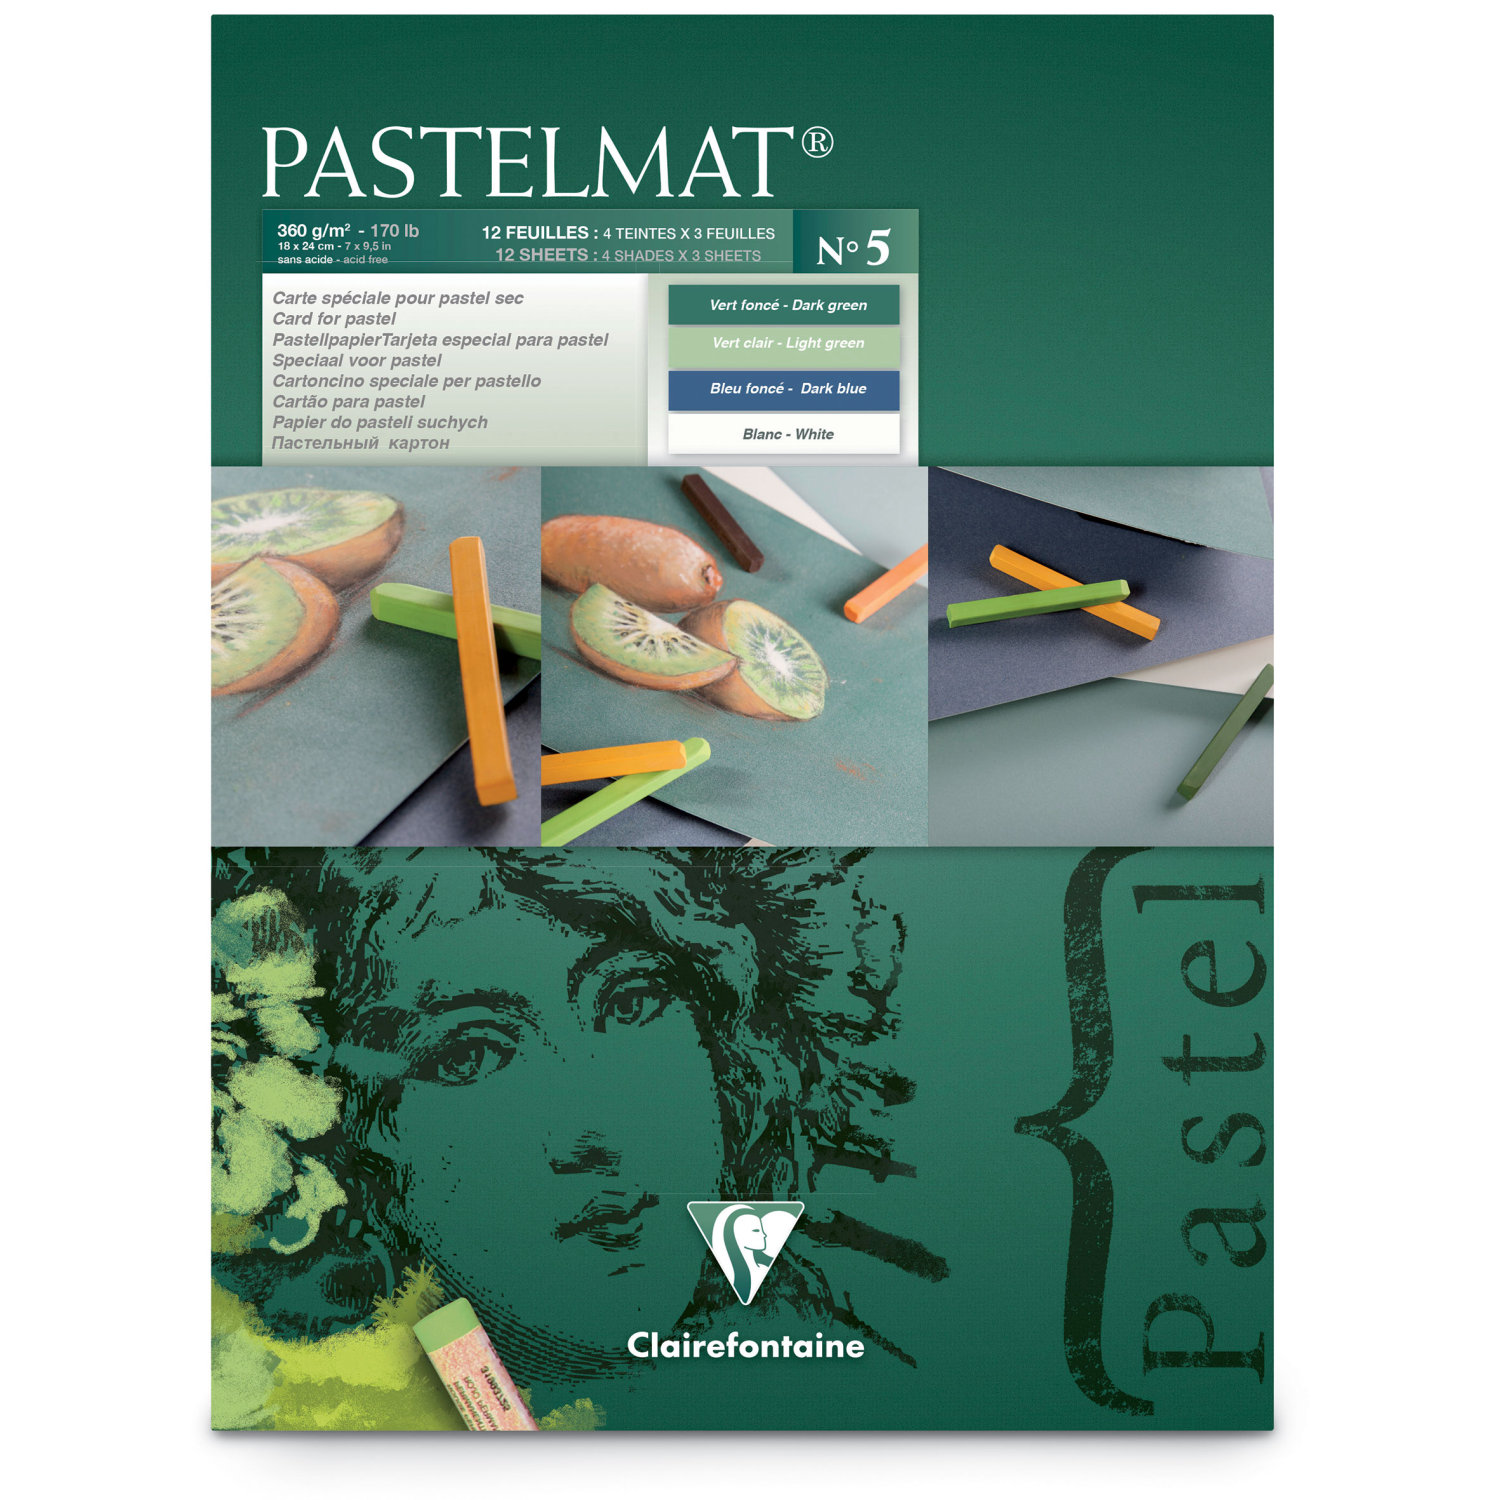 Clairefontaine Pastelmat Green Shades No.5 - 12 sheets 30 x 40cm